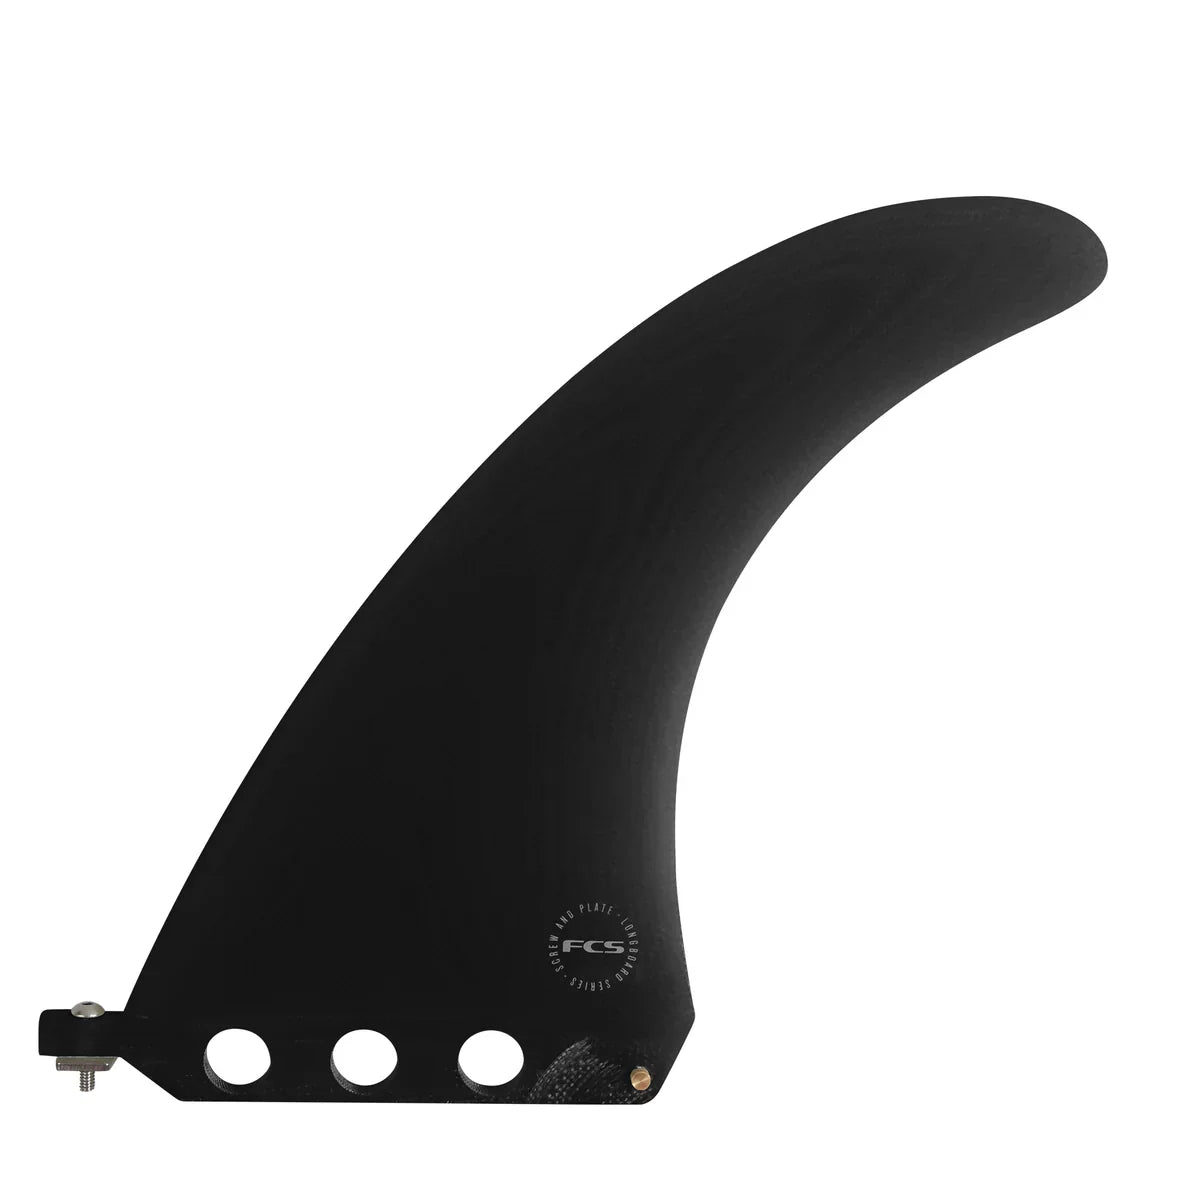 cs-i-screw-and-plate-connect-surfboard-fin-centre-box-longboard-black-galway-ireland-blacksheepsurfco